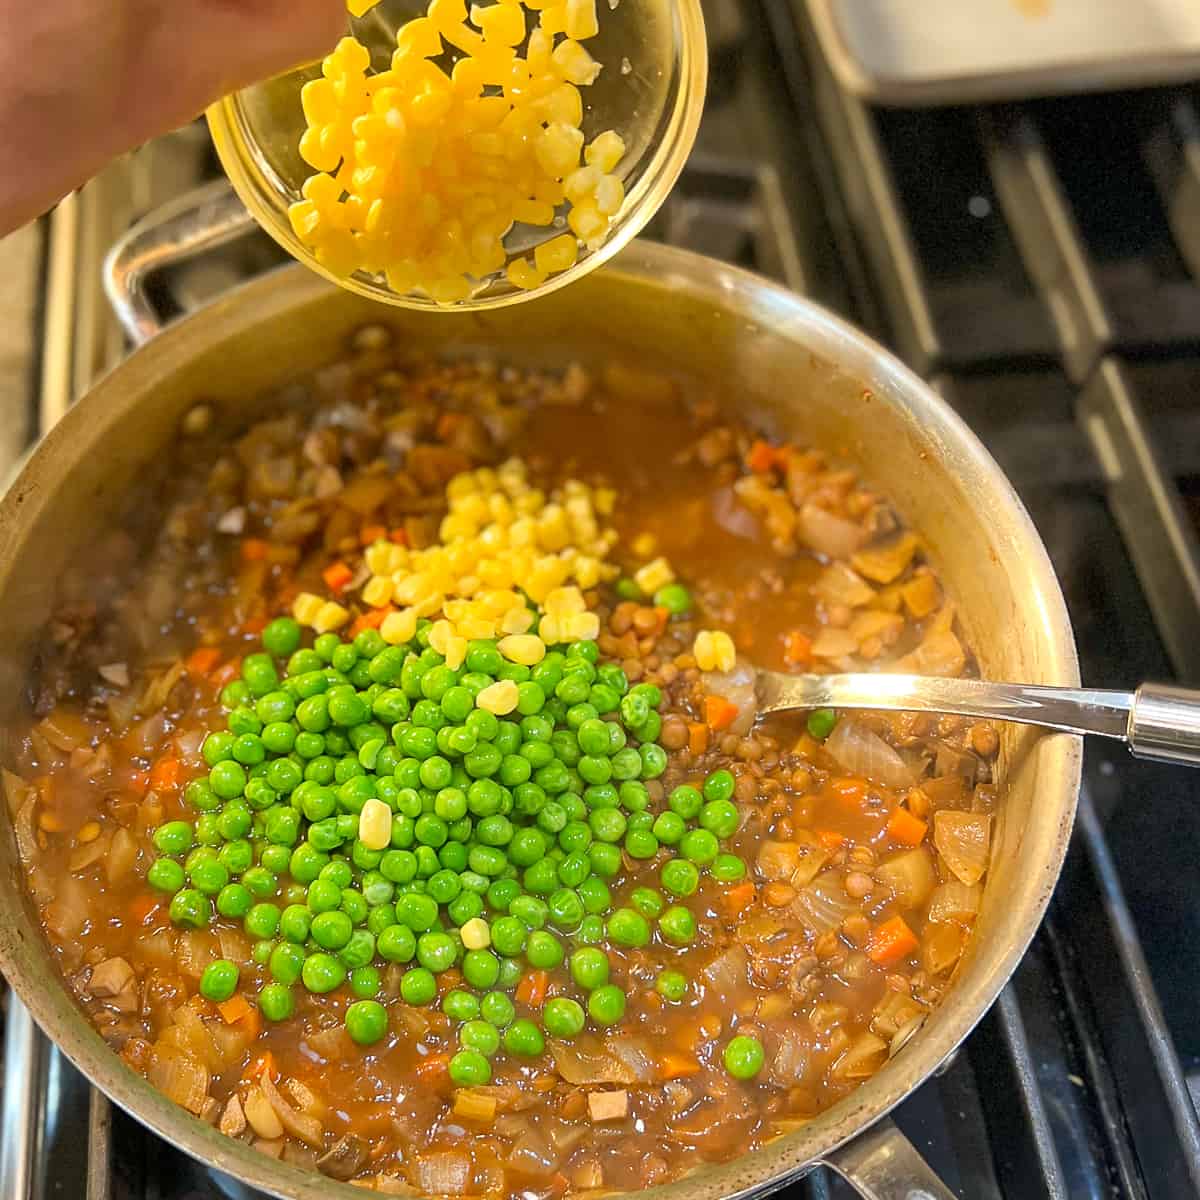 corn being added to the lentil and veggie mixture in the large pan